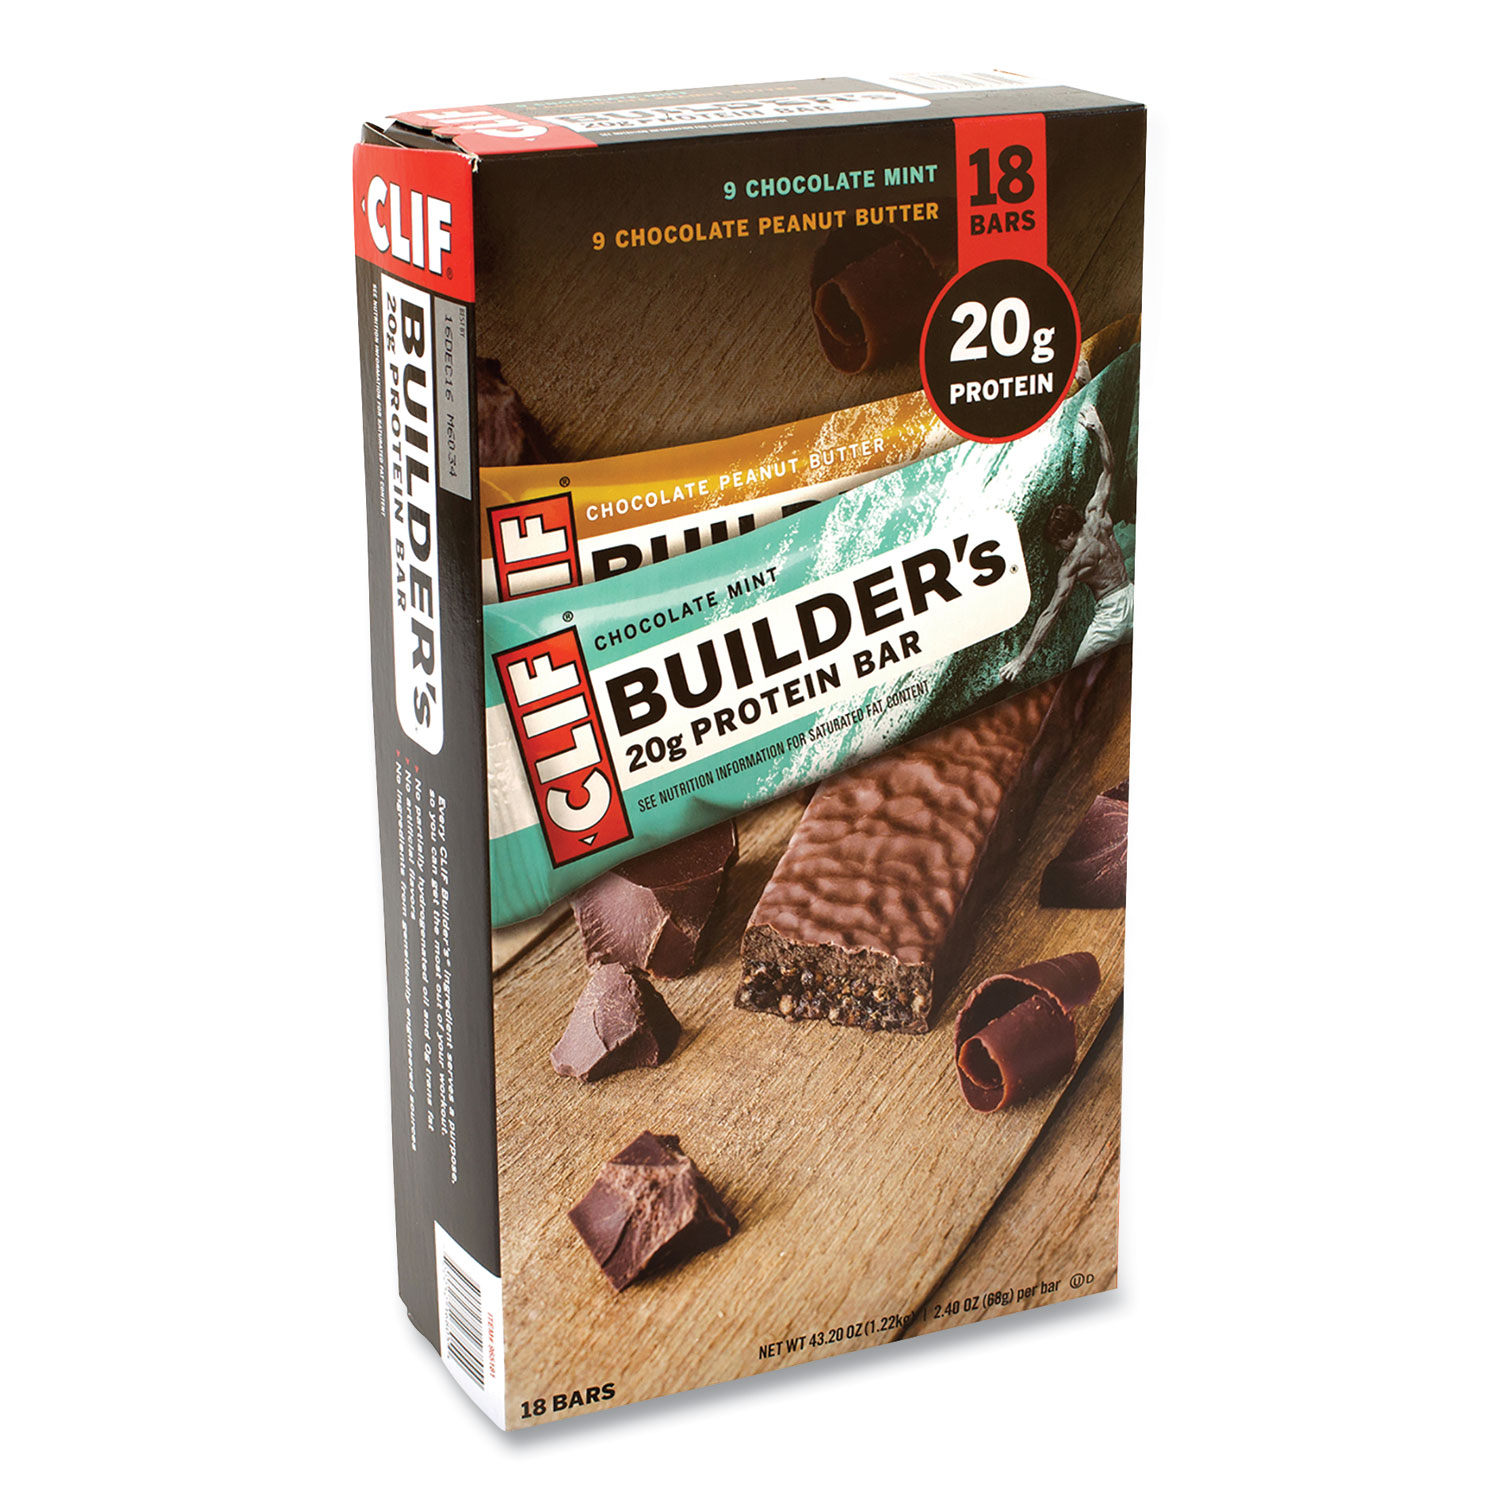 CLIF® Bar Builders Protein Bar, Chocolate Mint/Chocolate Peanut Butter, 2.4 oz Bar, 18 Bars/Box, Free Delivery in 1-4 Business Days